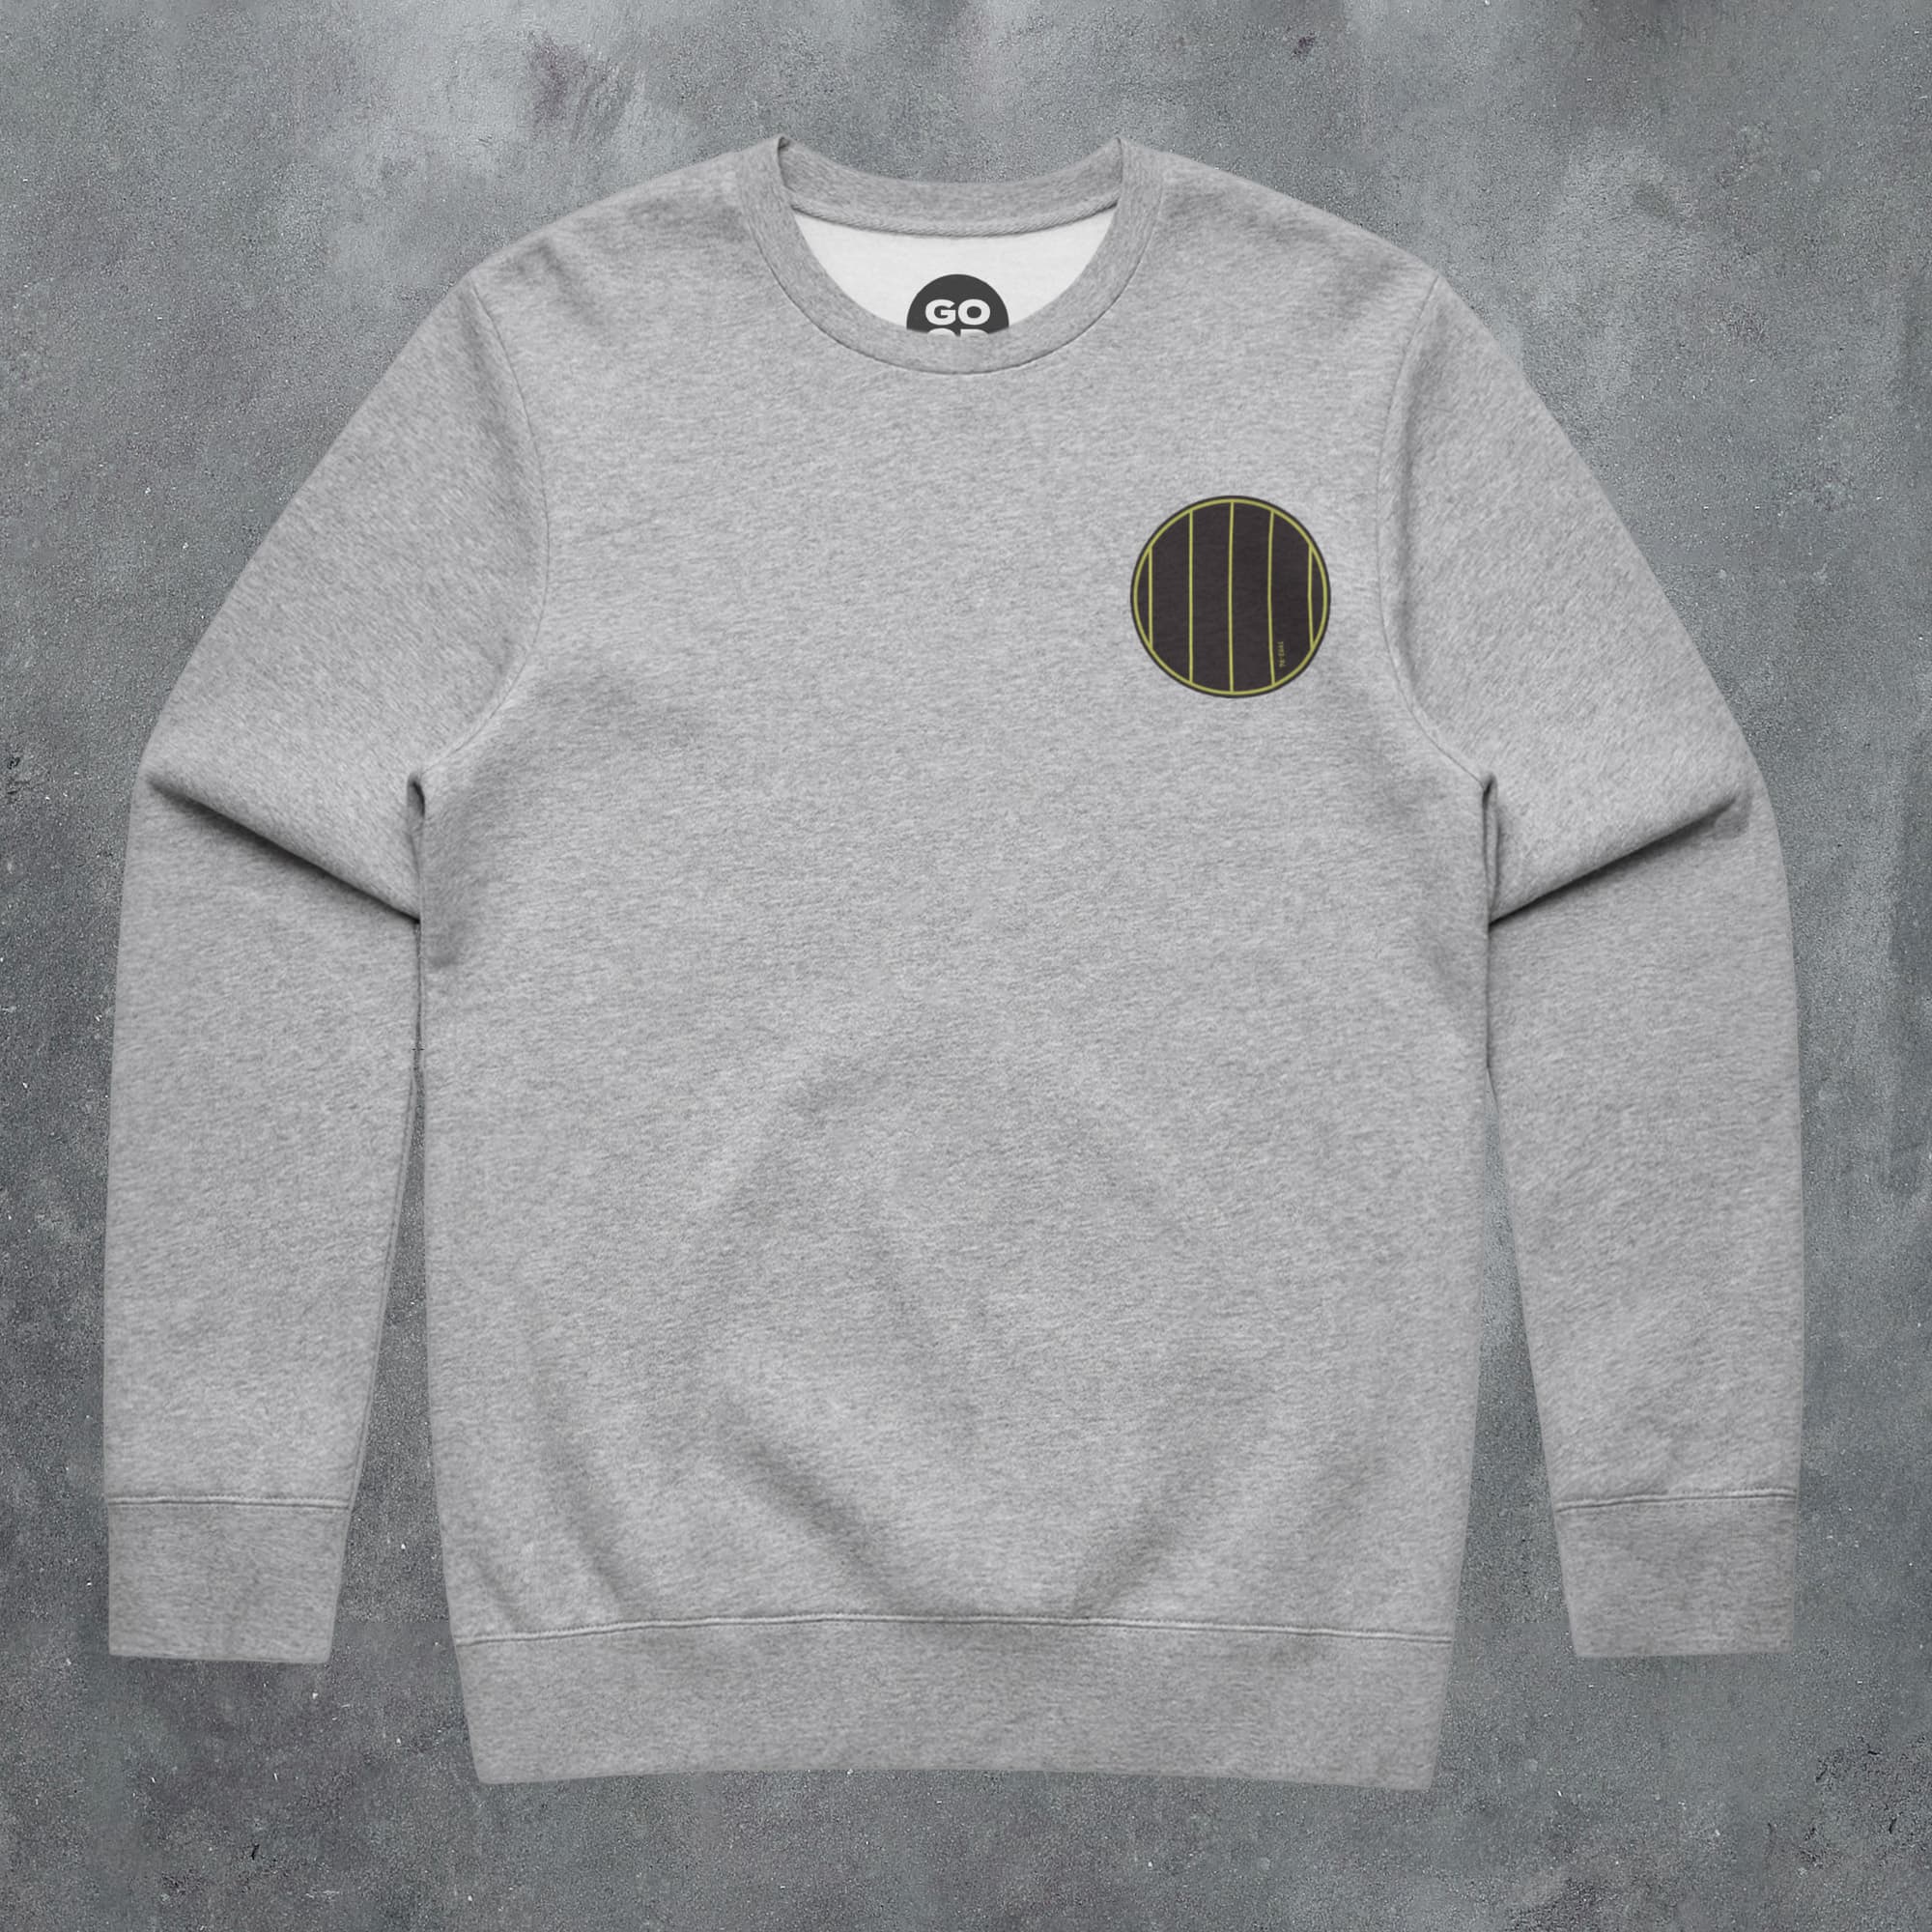 a grey sweatshirt with a round patch on the chest